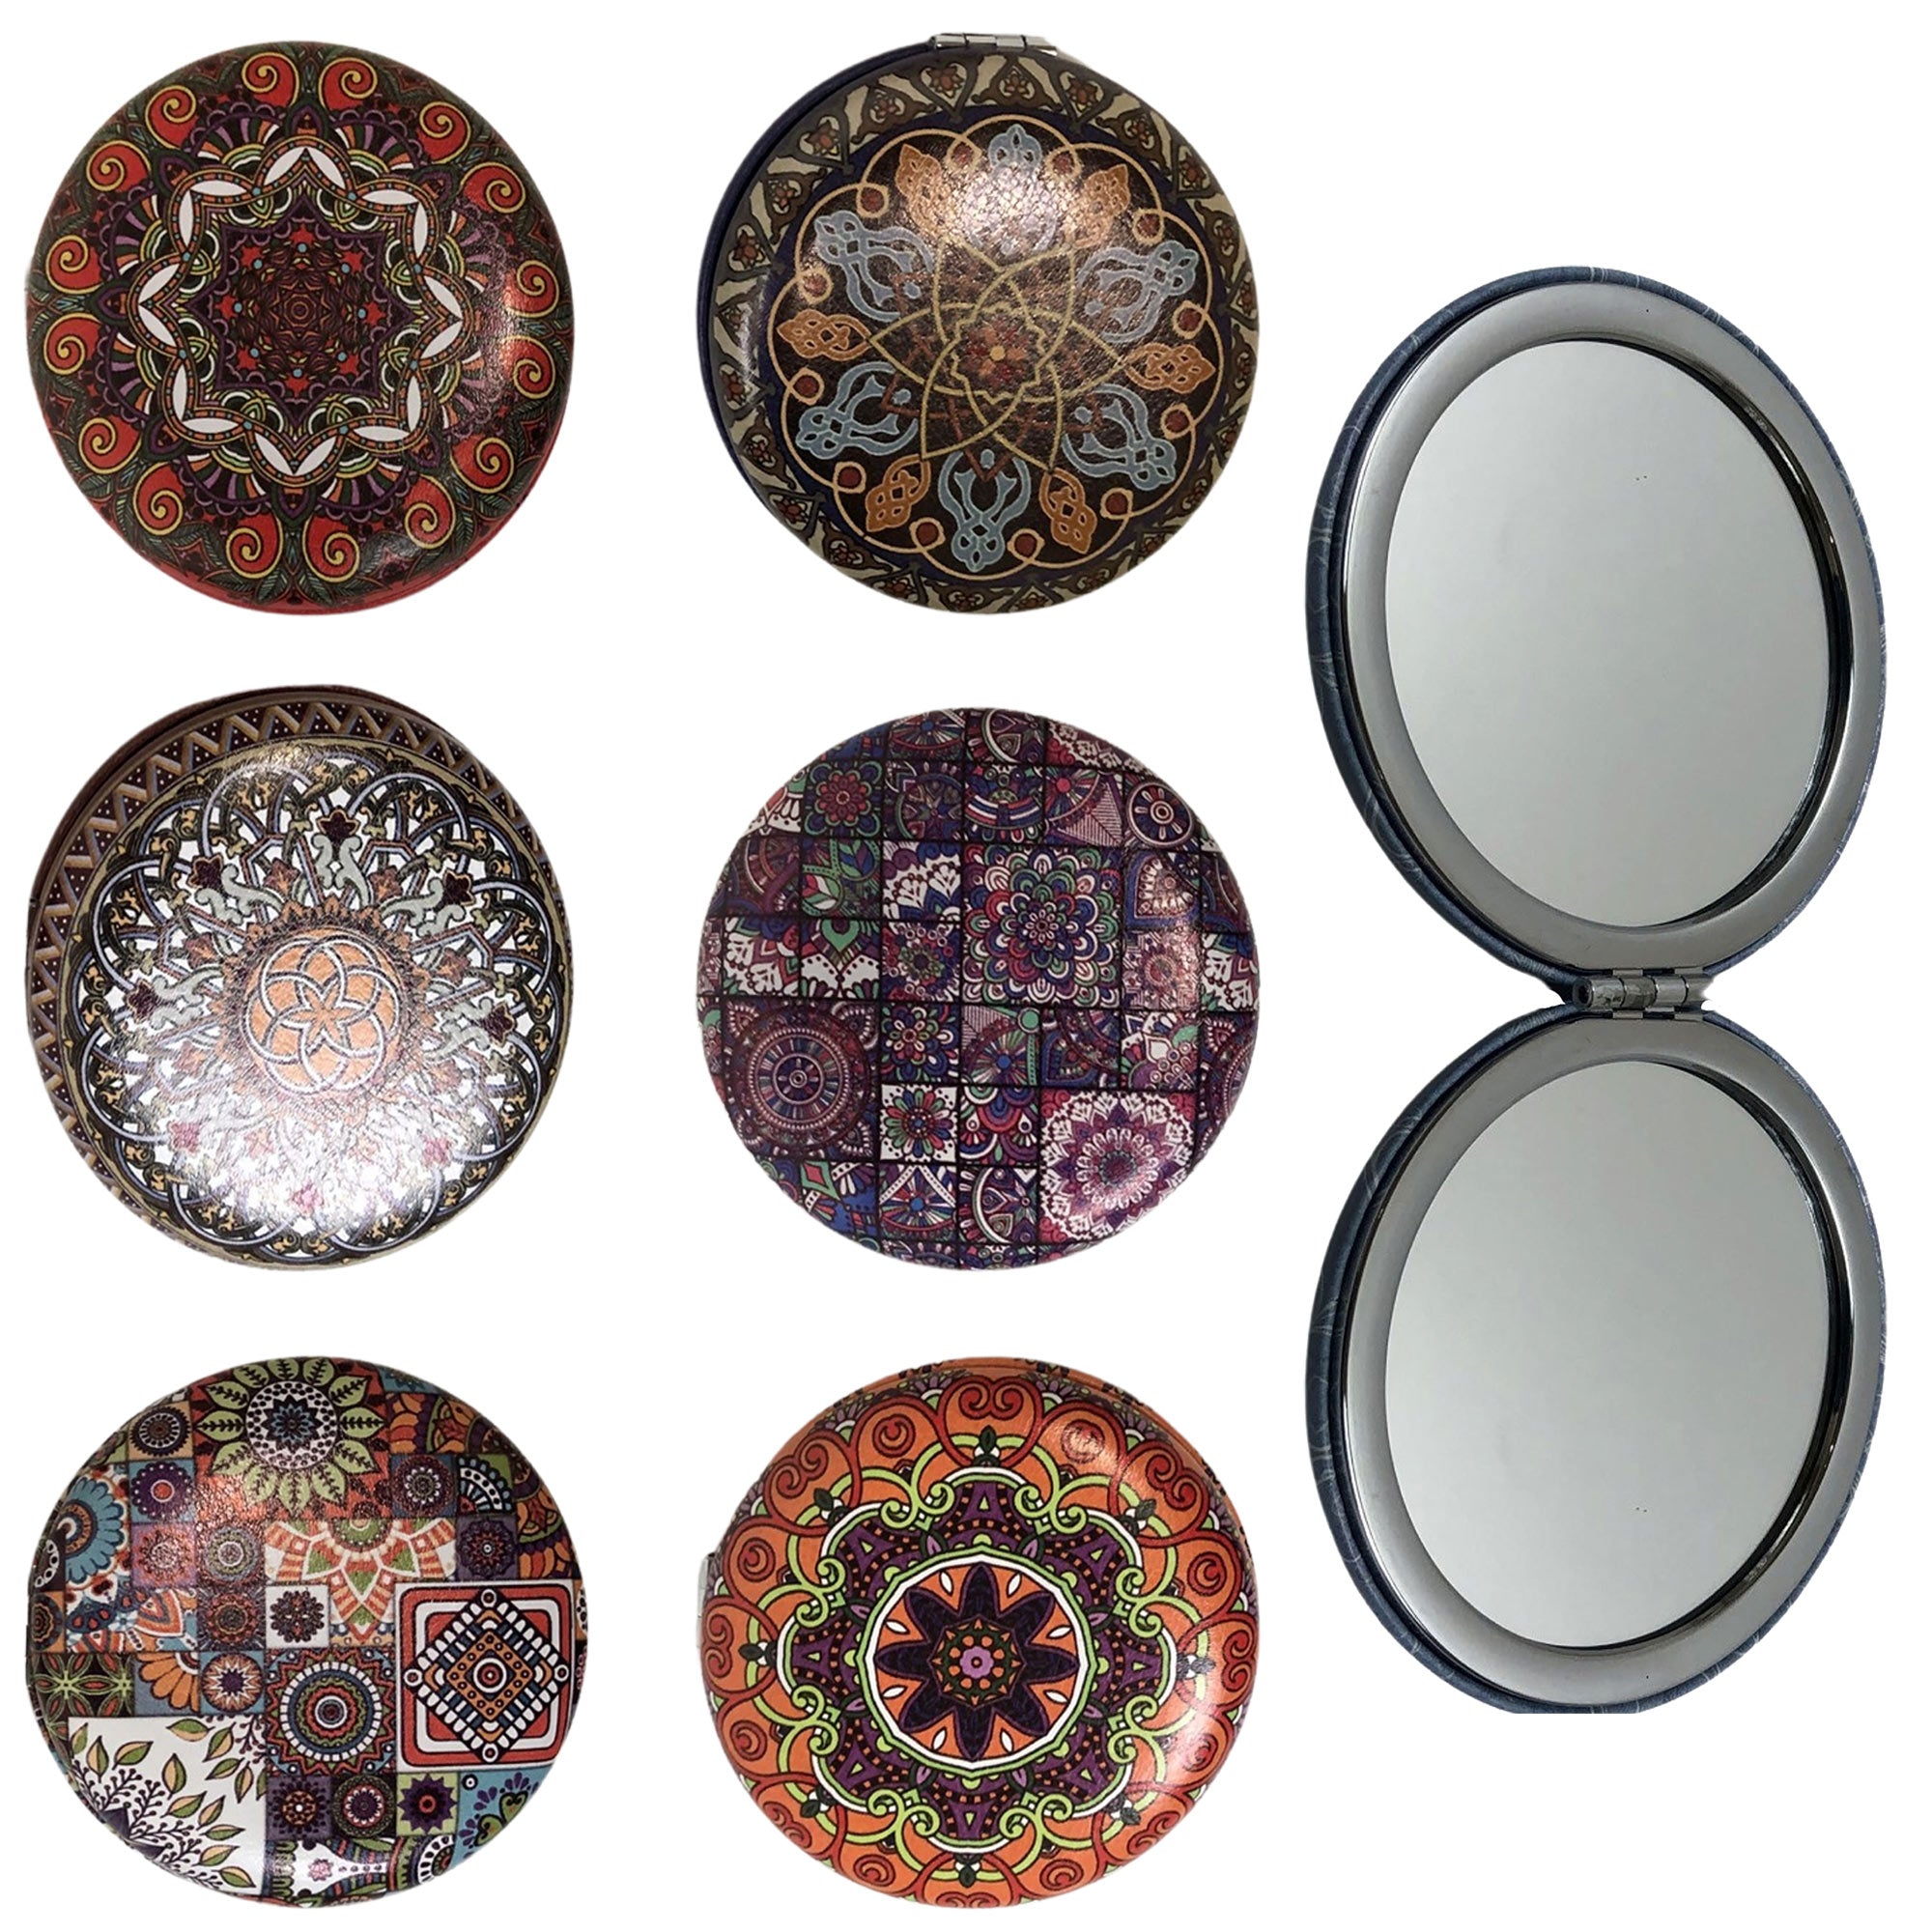 CLEARANCE COSMETIC MIRRORS KALEIDOSCOPE PRINTS (CASE OF 48 - $1.50 / PIECE)  Wholesale Round Cosmetic Mirrors in Assorted Prints SKU: 906-DATURA-48